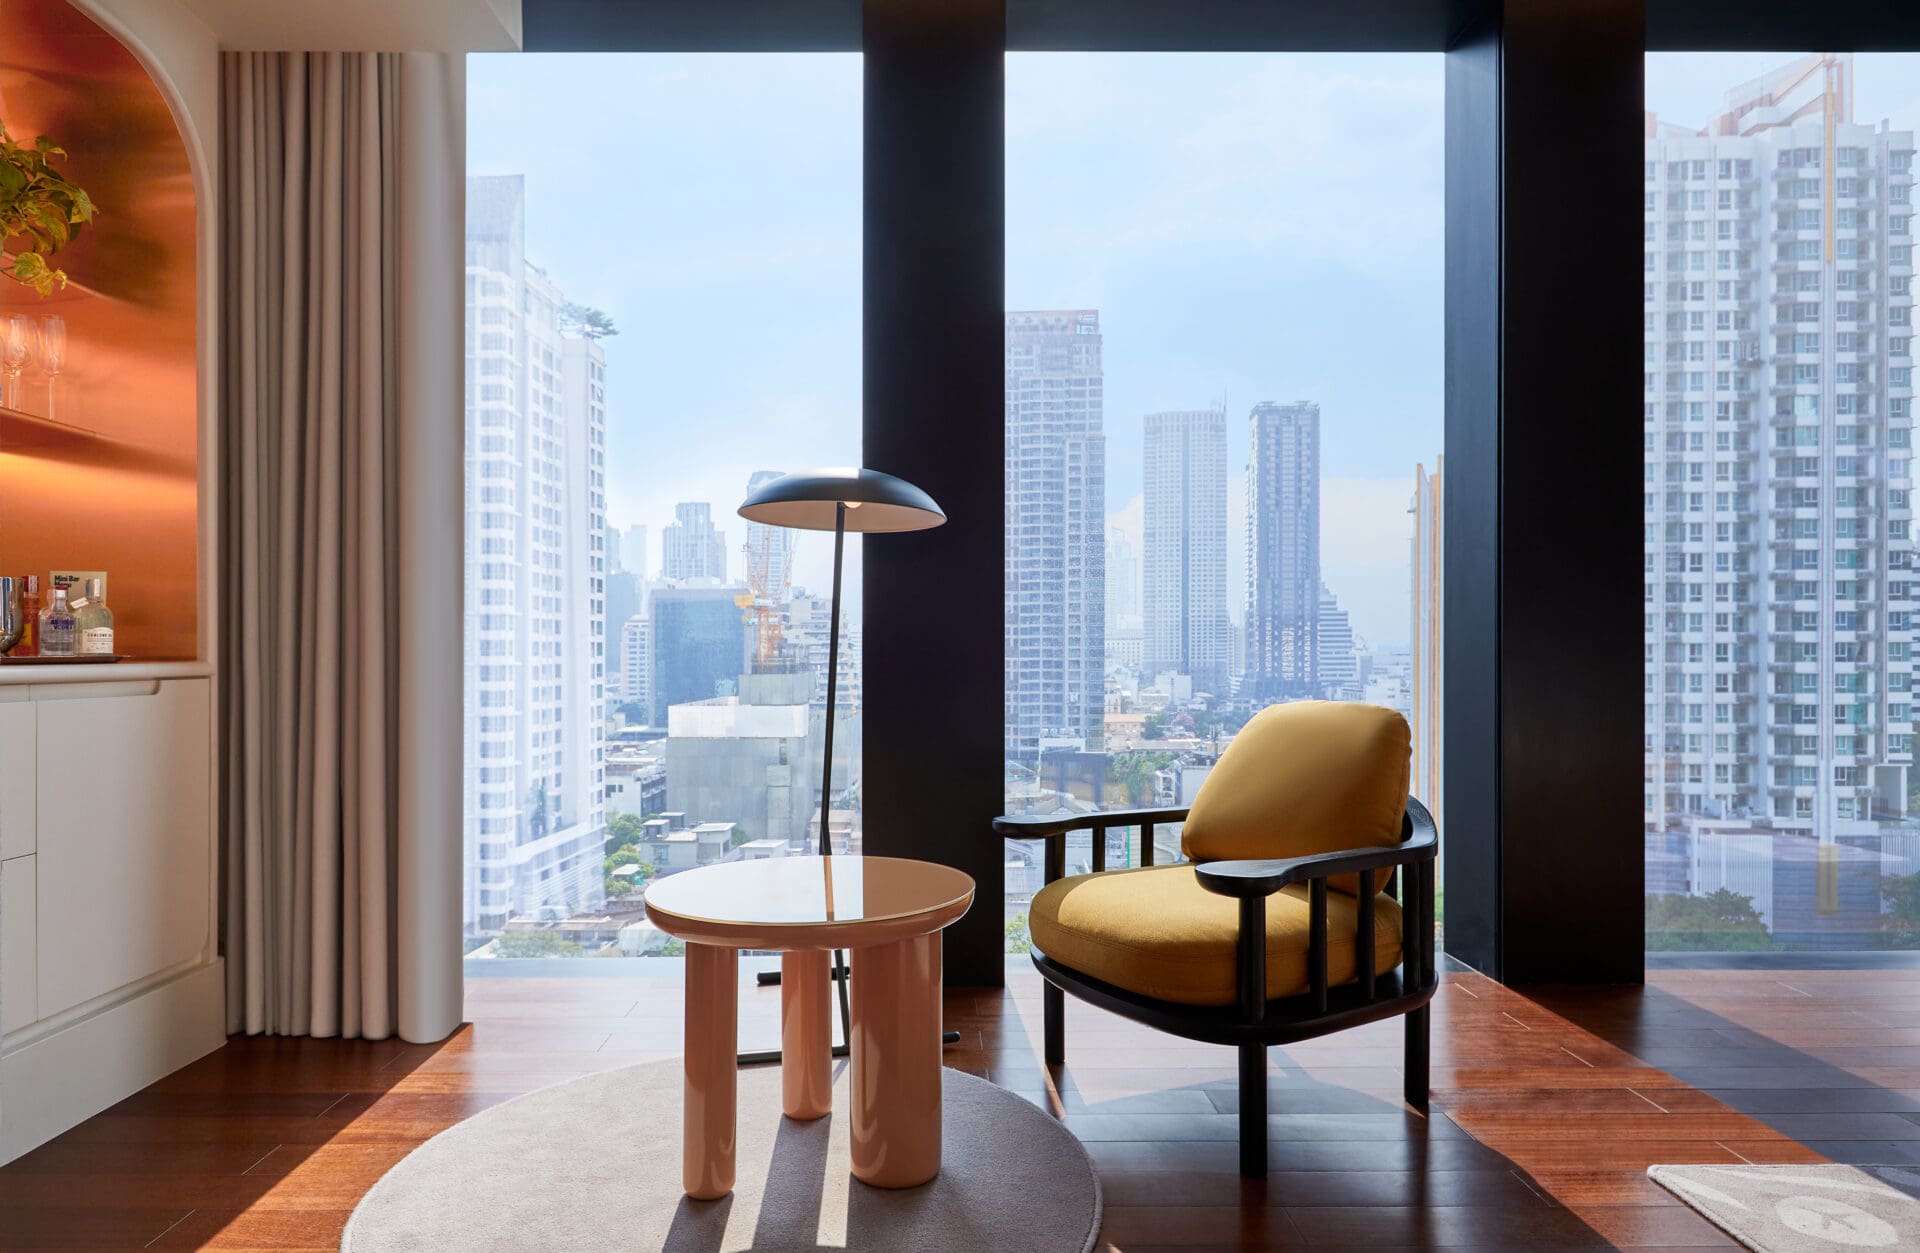 Best new hotels for summer 2022 | An armchair with dark wood arms and legs and overstuffed yellow upholstery and a low round table sit in front of floor-to-ceiling windows looking out over a city skyline